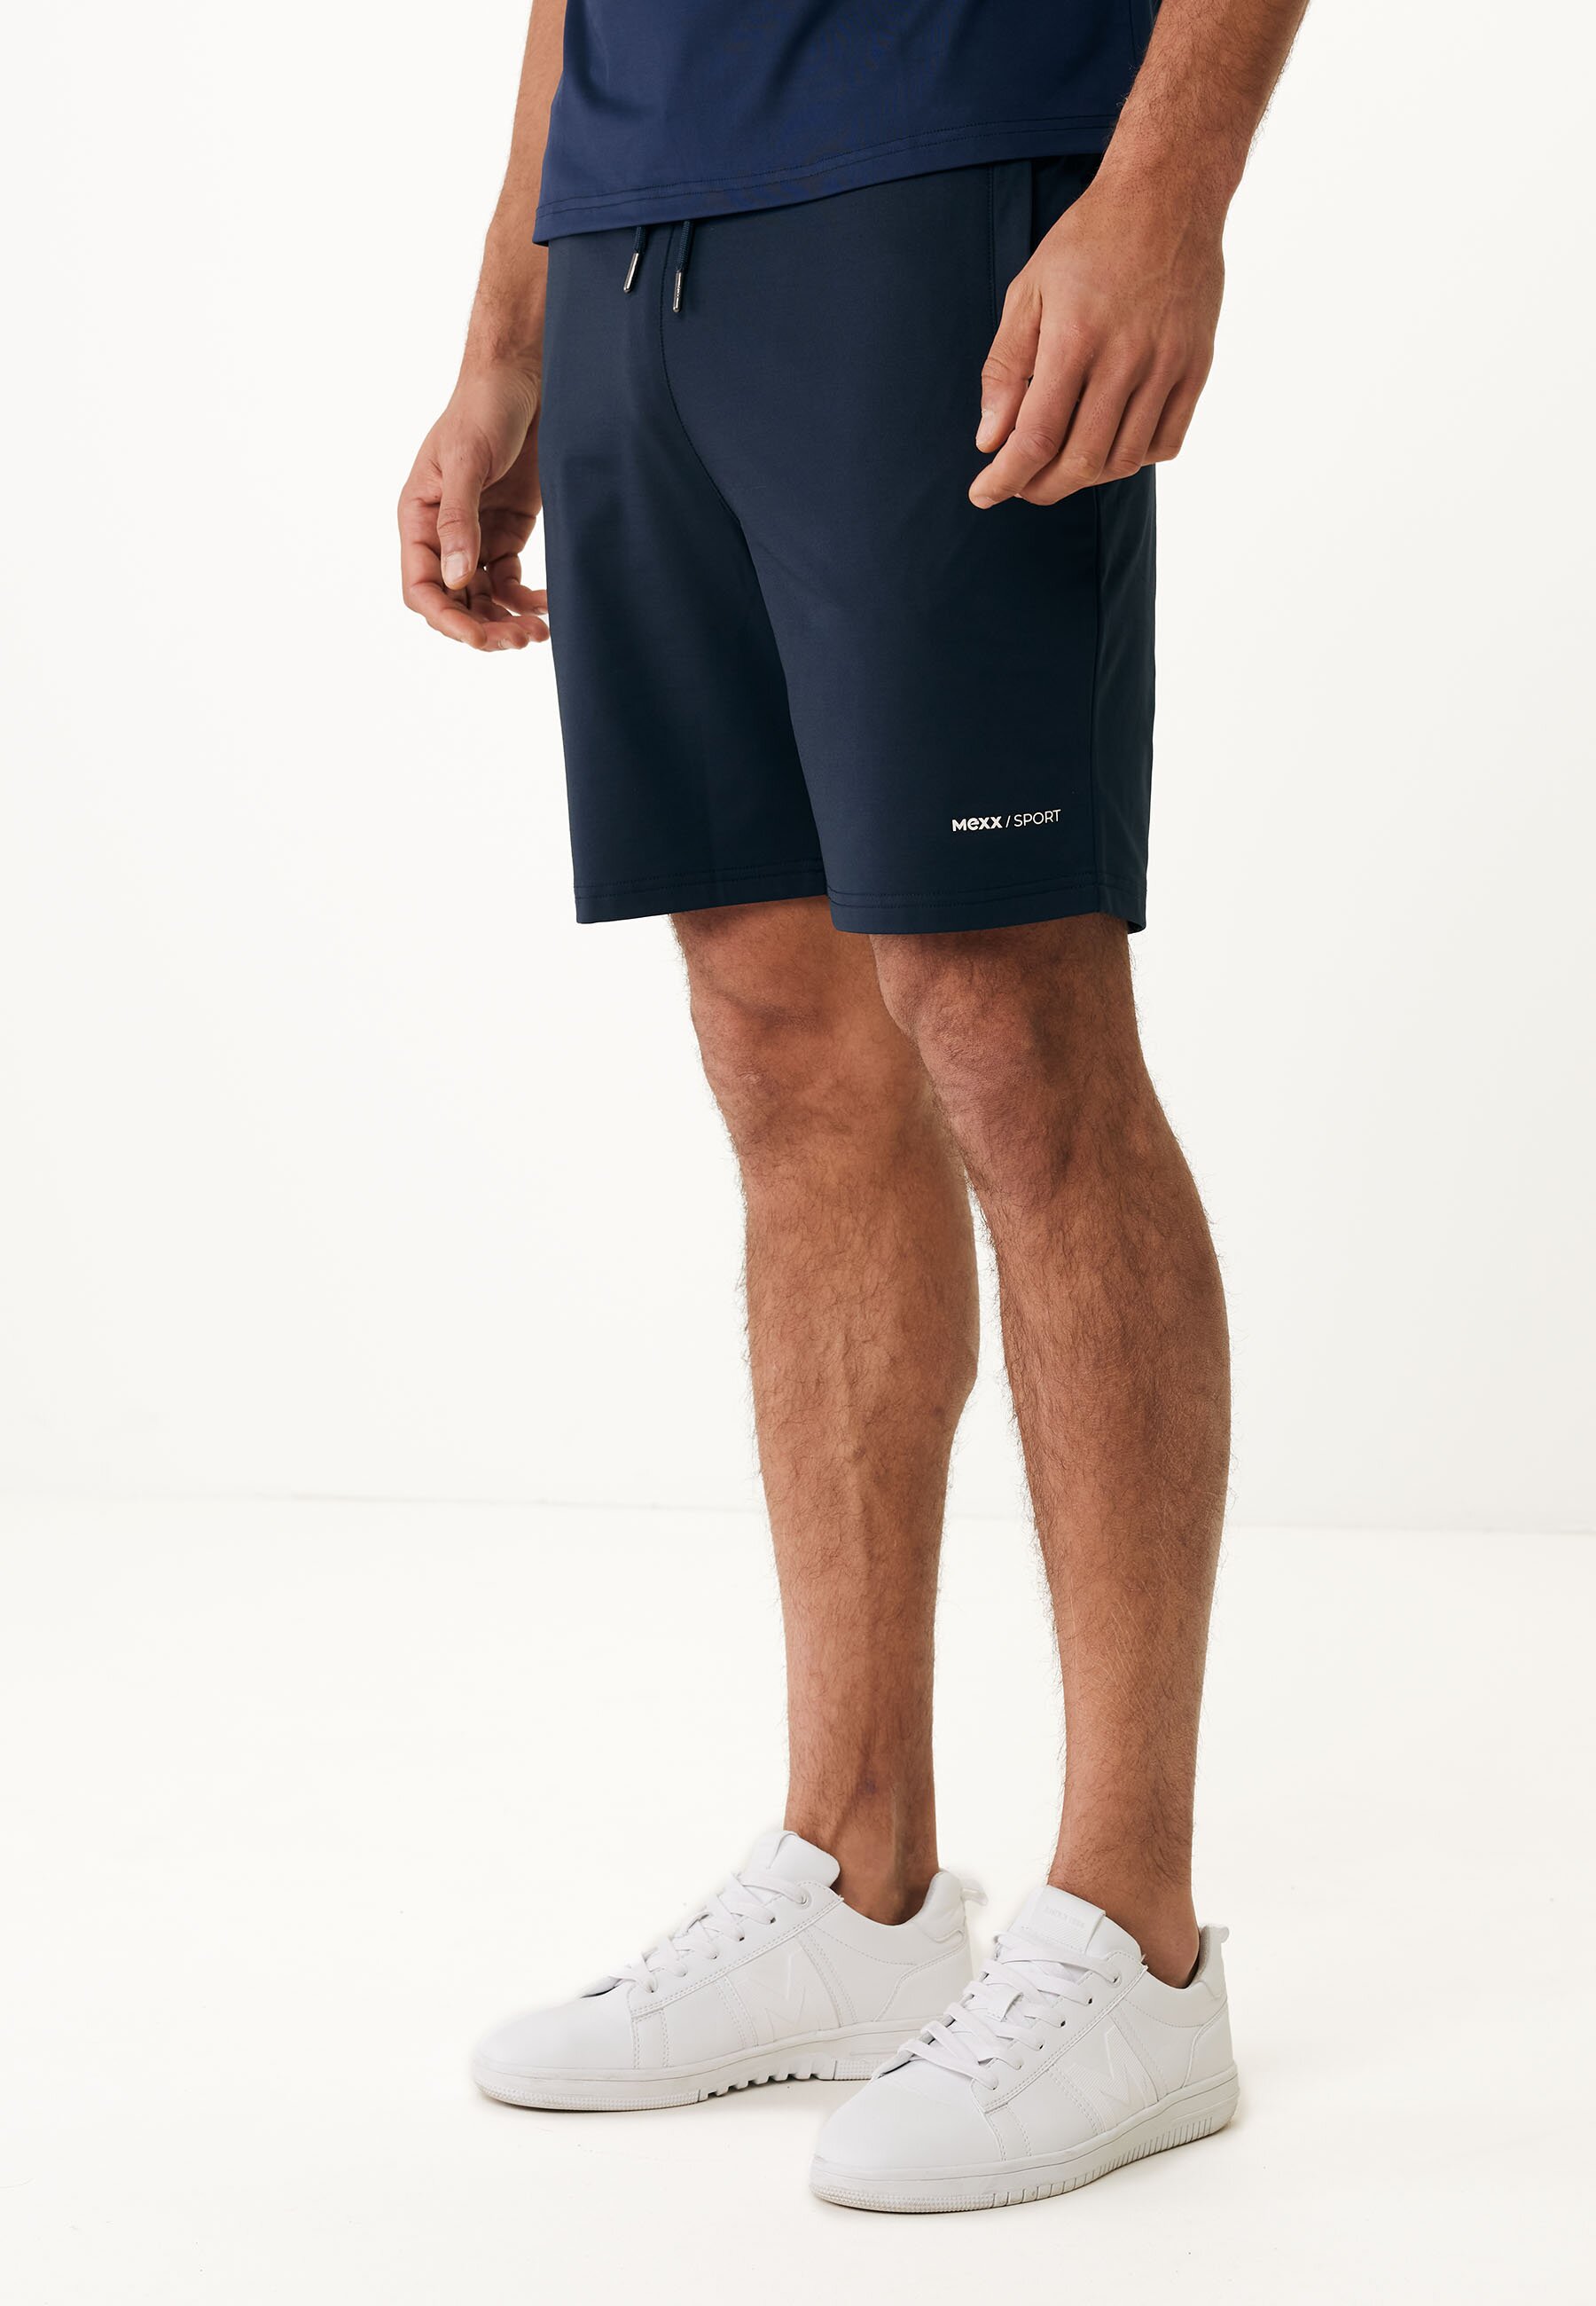 Mexx Activewear Shorts With Contrast Back Panel Mannen - Navy - Maat L